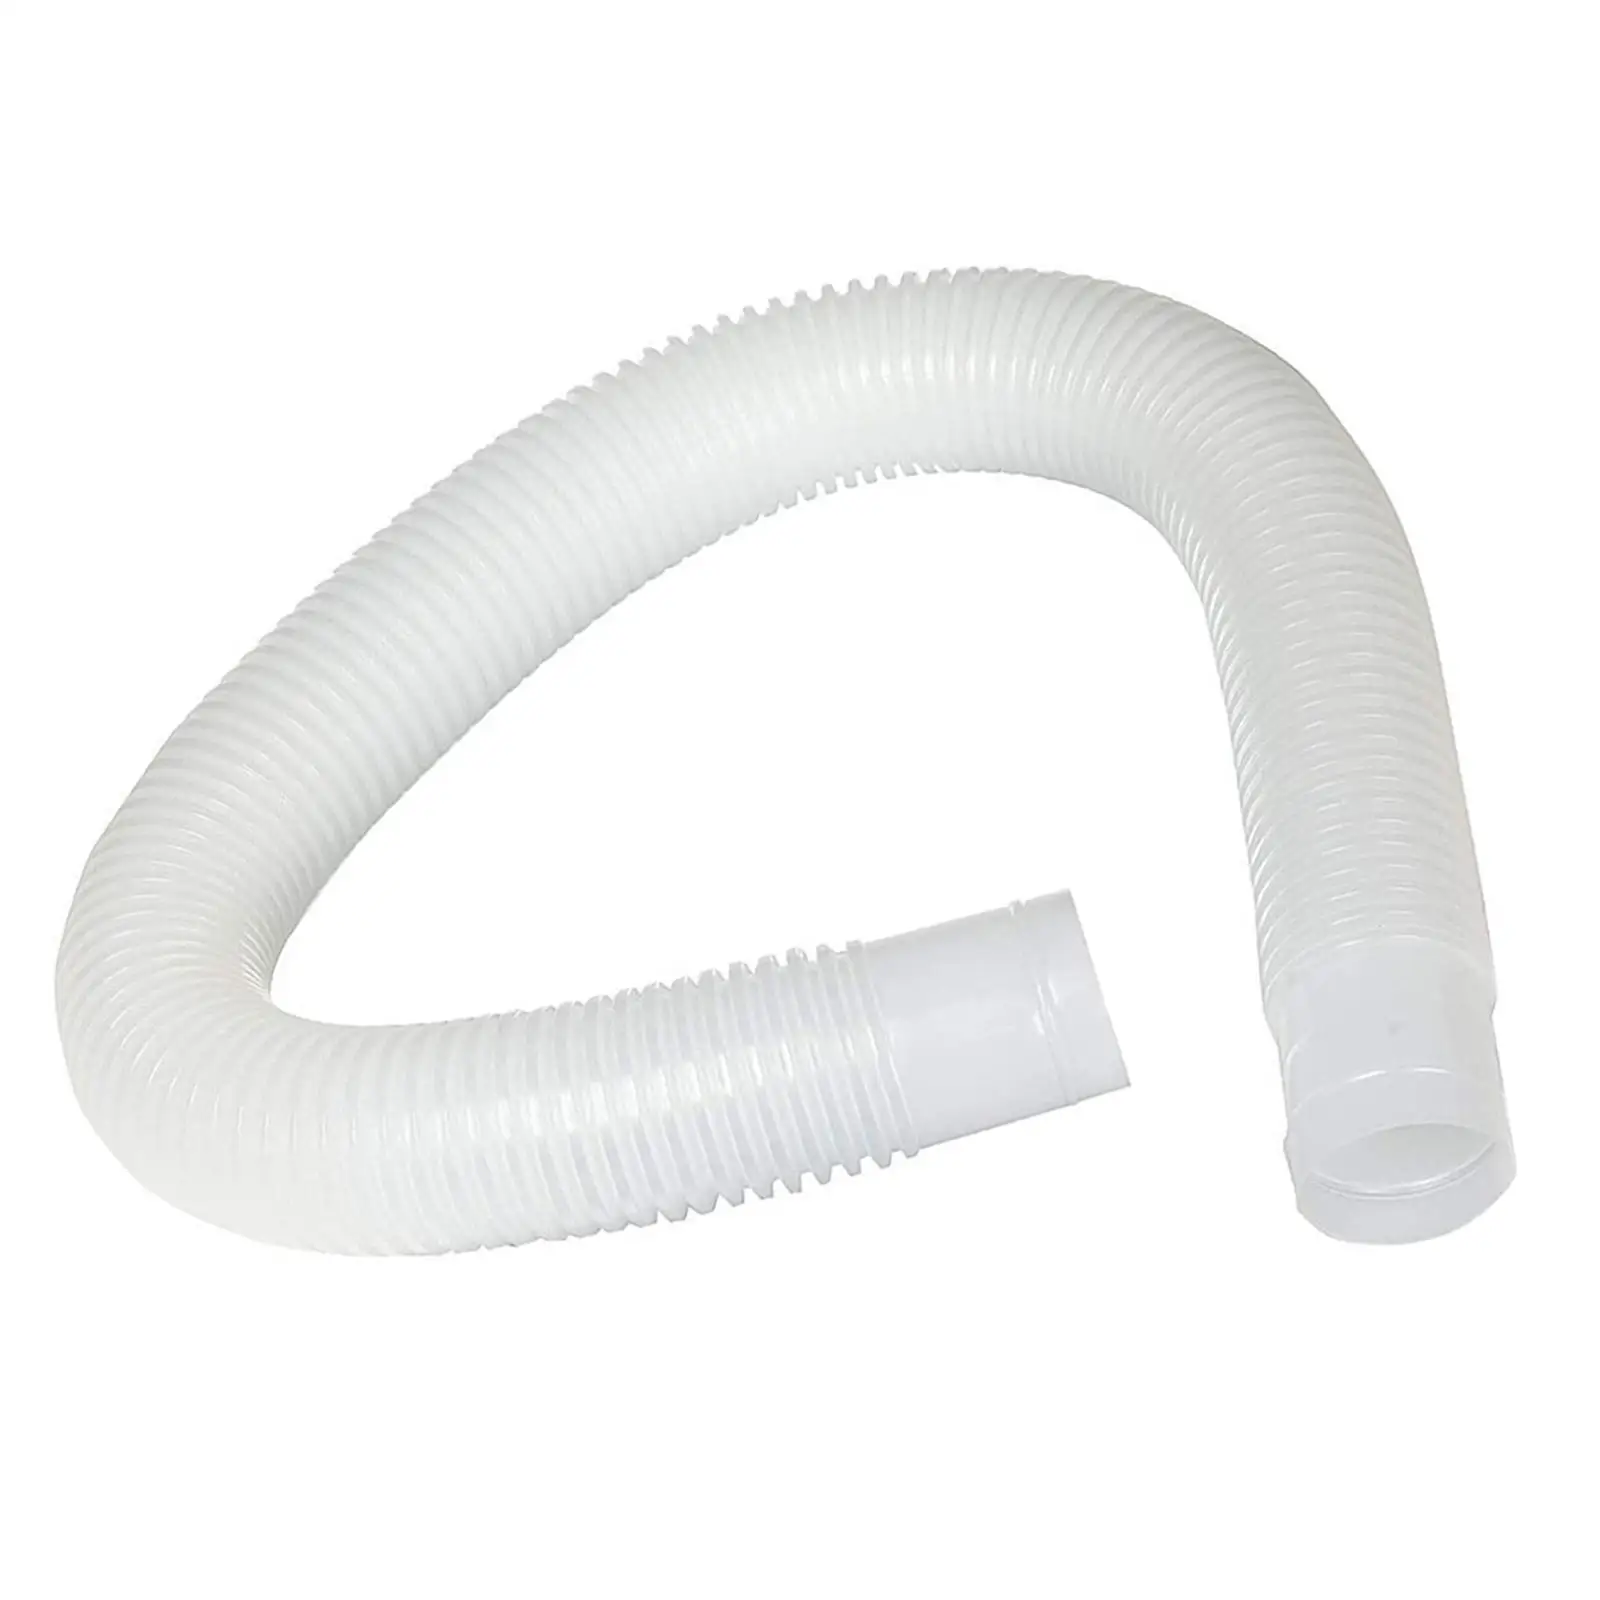 Pools Skimmer Hose Accessory Durable Replaces Parts Strainer Replacement Hose